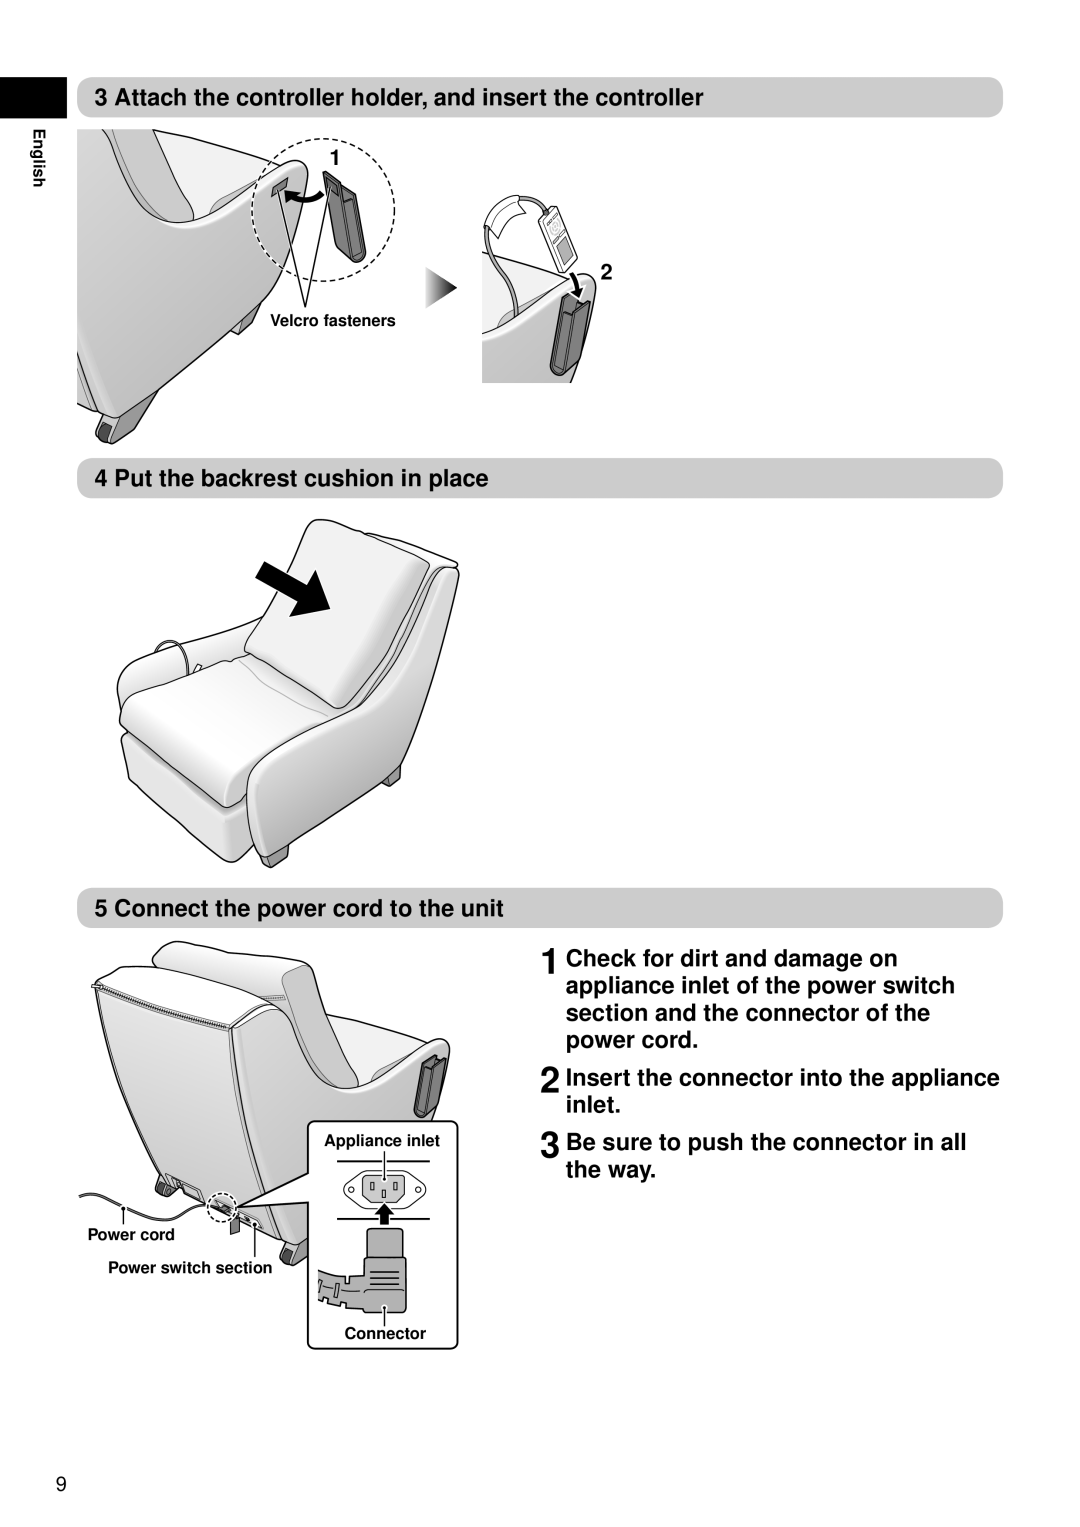 Panasonic EP-MS40 manual Attach the controller holder, and insert the controller, Put the backrest cushion in place 